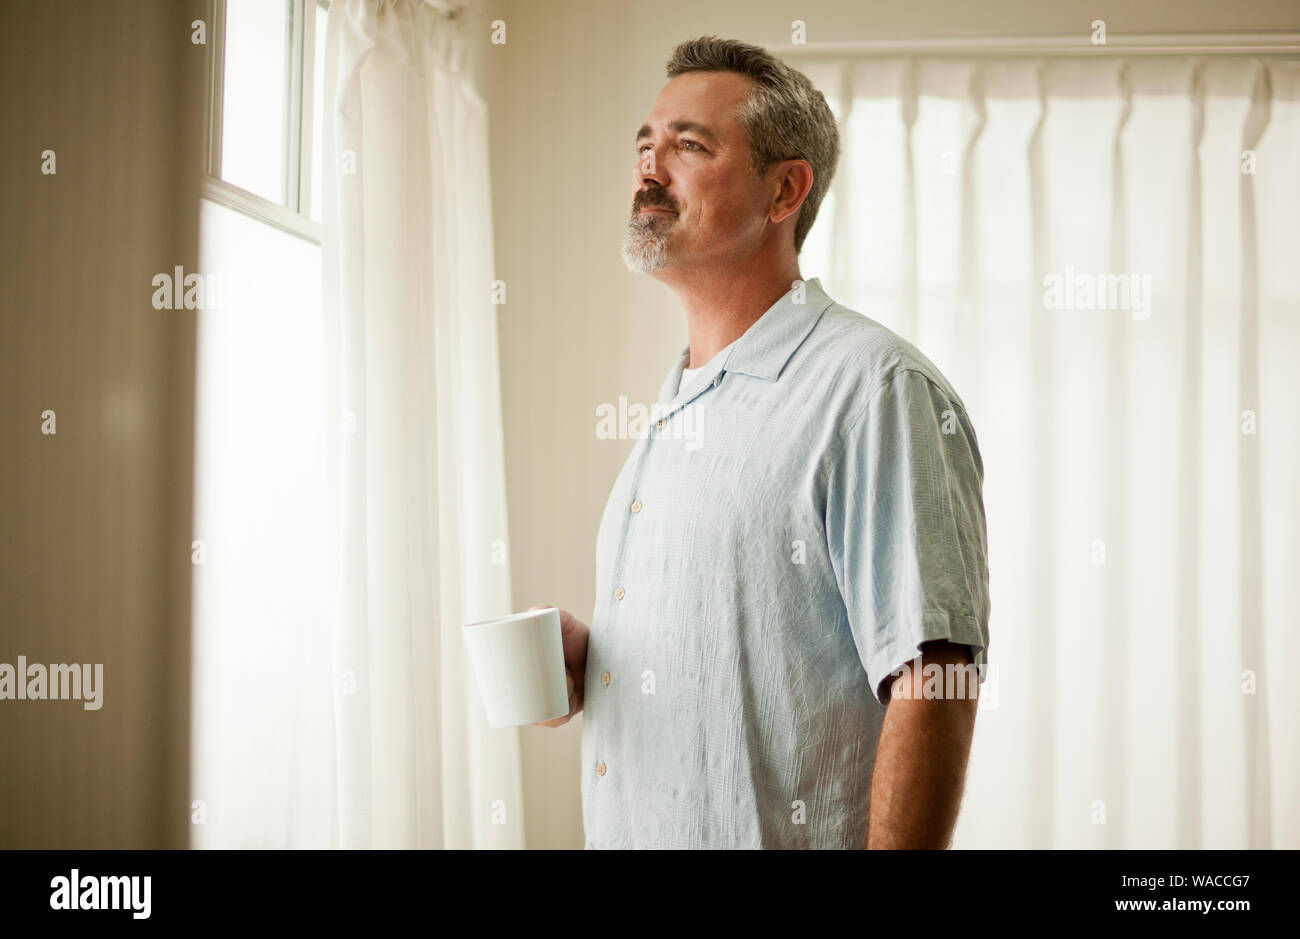 Mature adult man standing in a living room looking pensive. Stock Photo